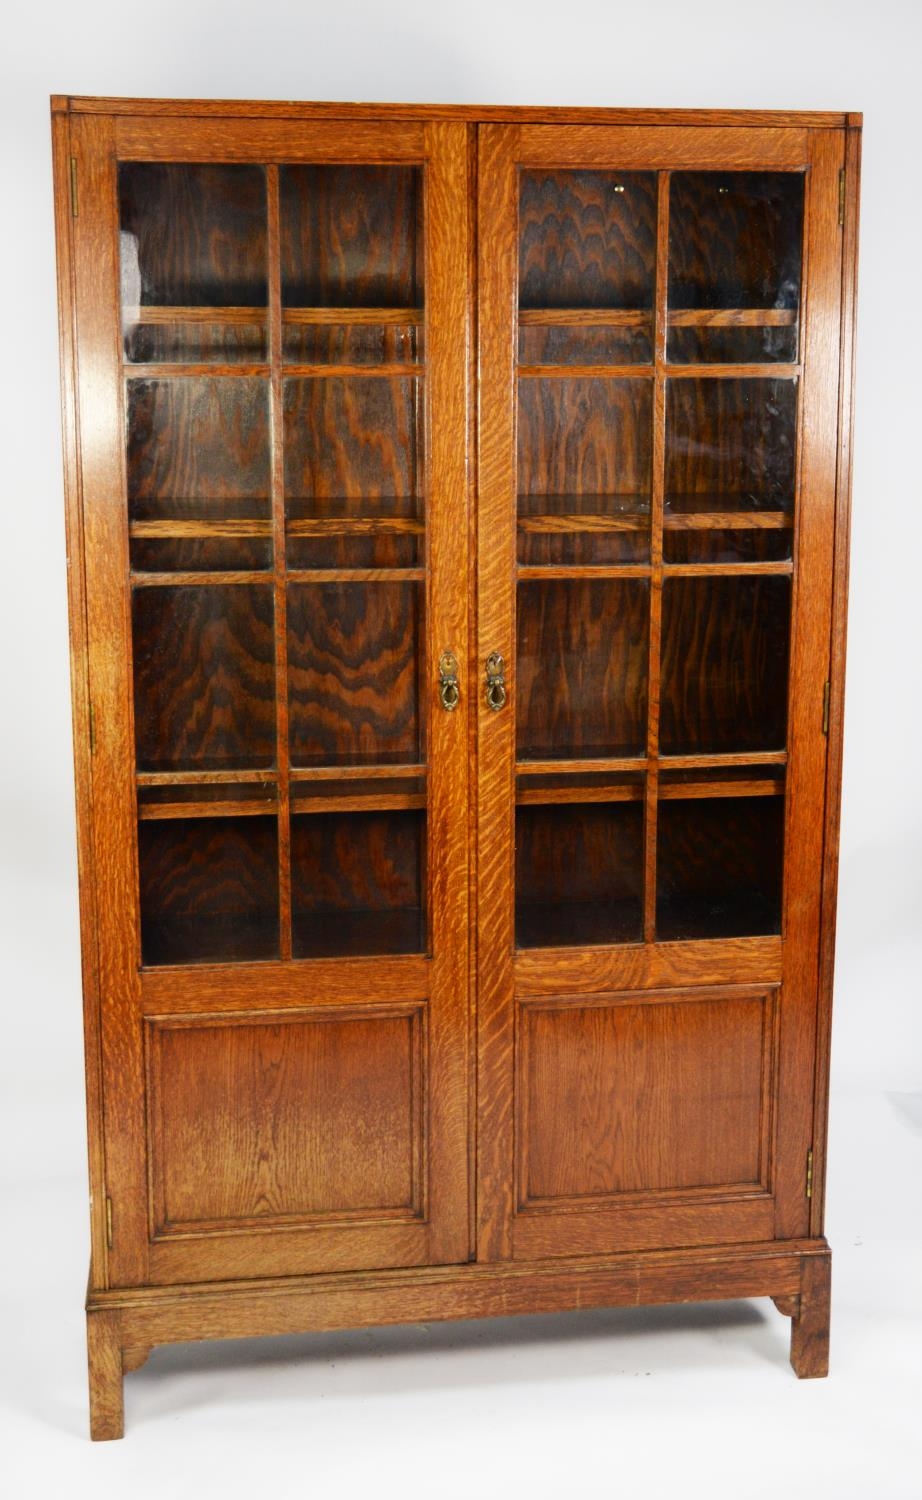 GLOBE WERNICKE OAK BOOKCASE, each of the pair of cupboard doors with eight astragal glazed square